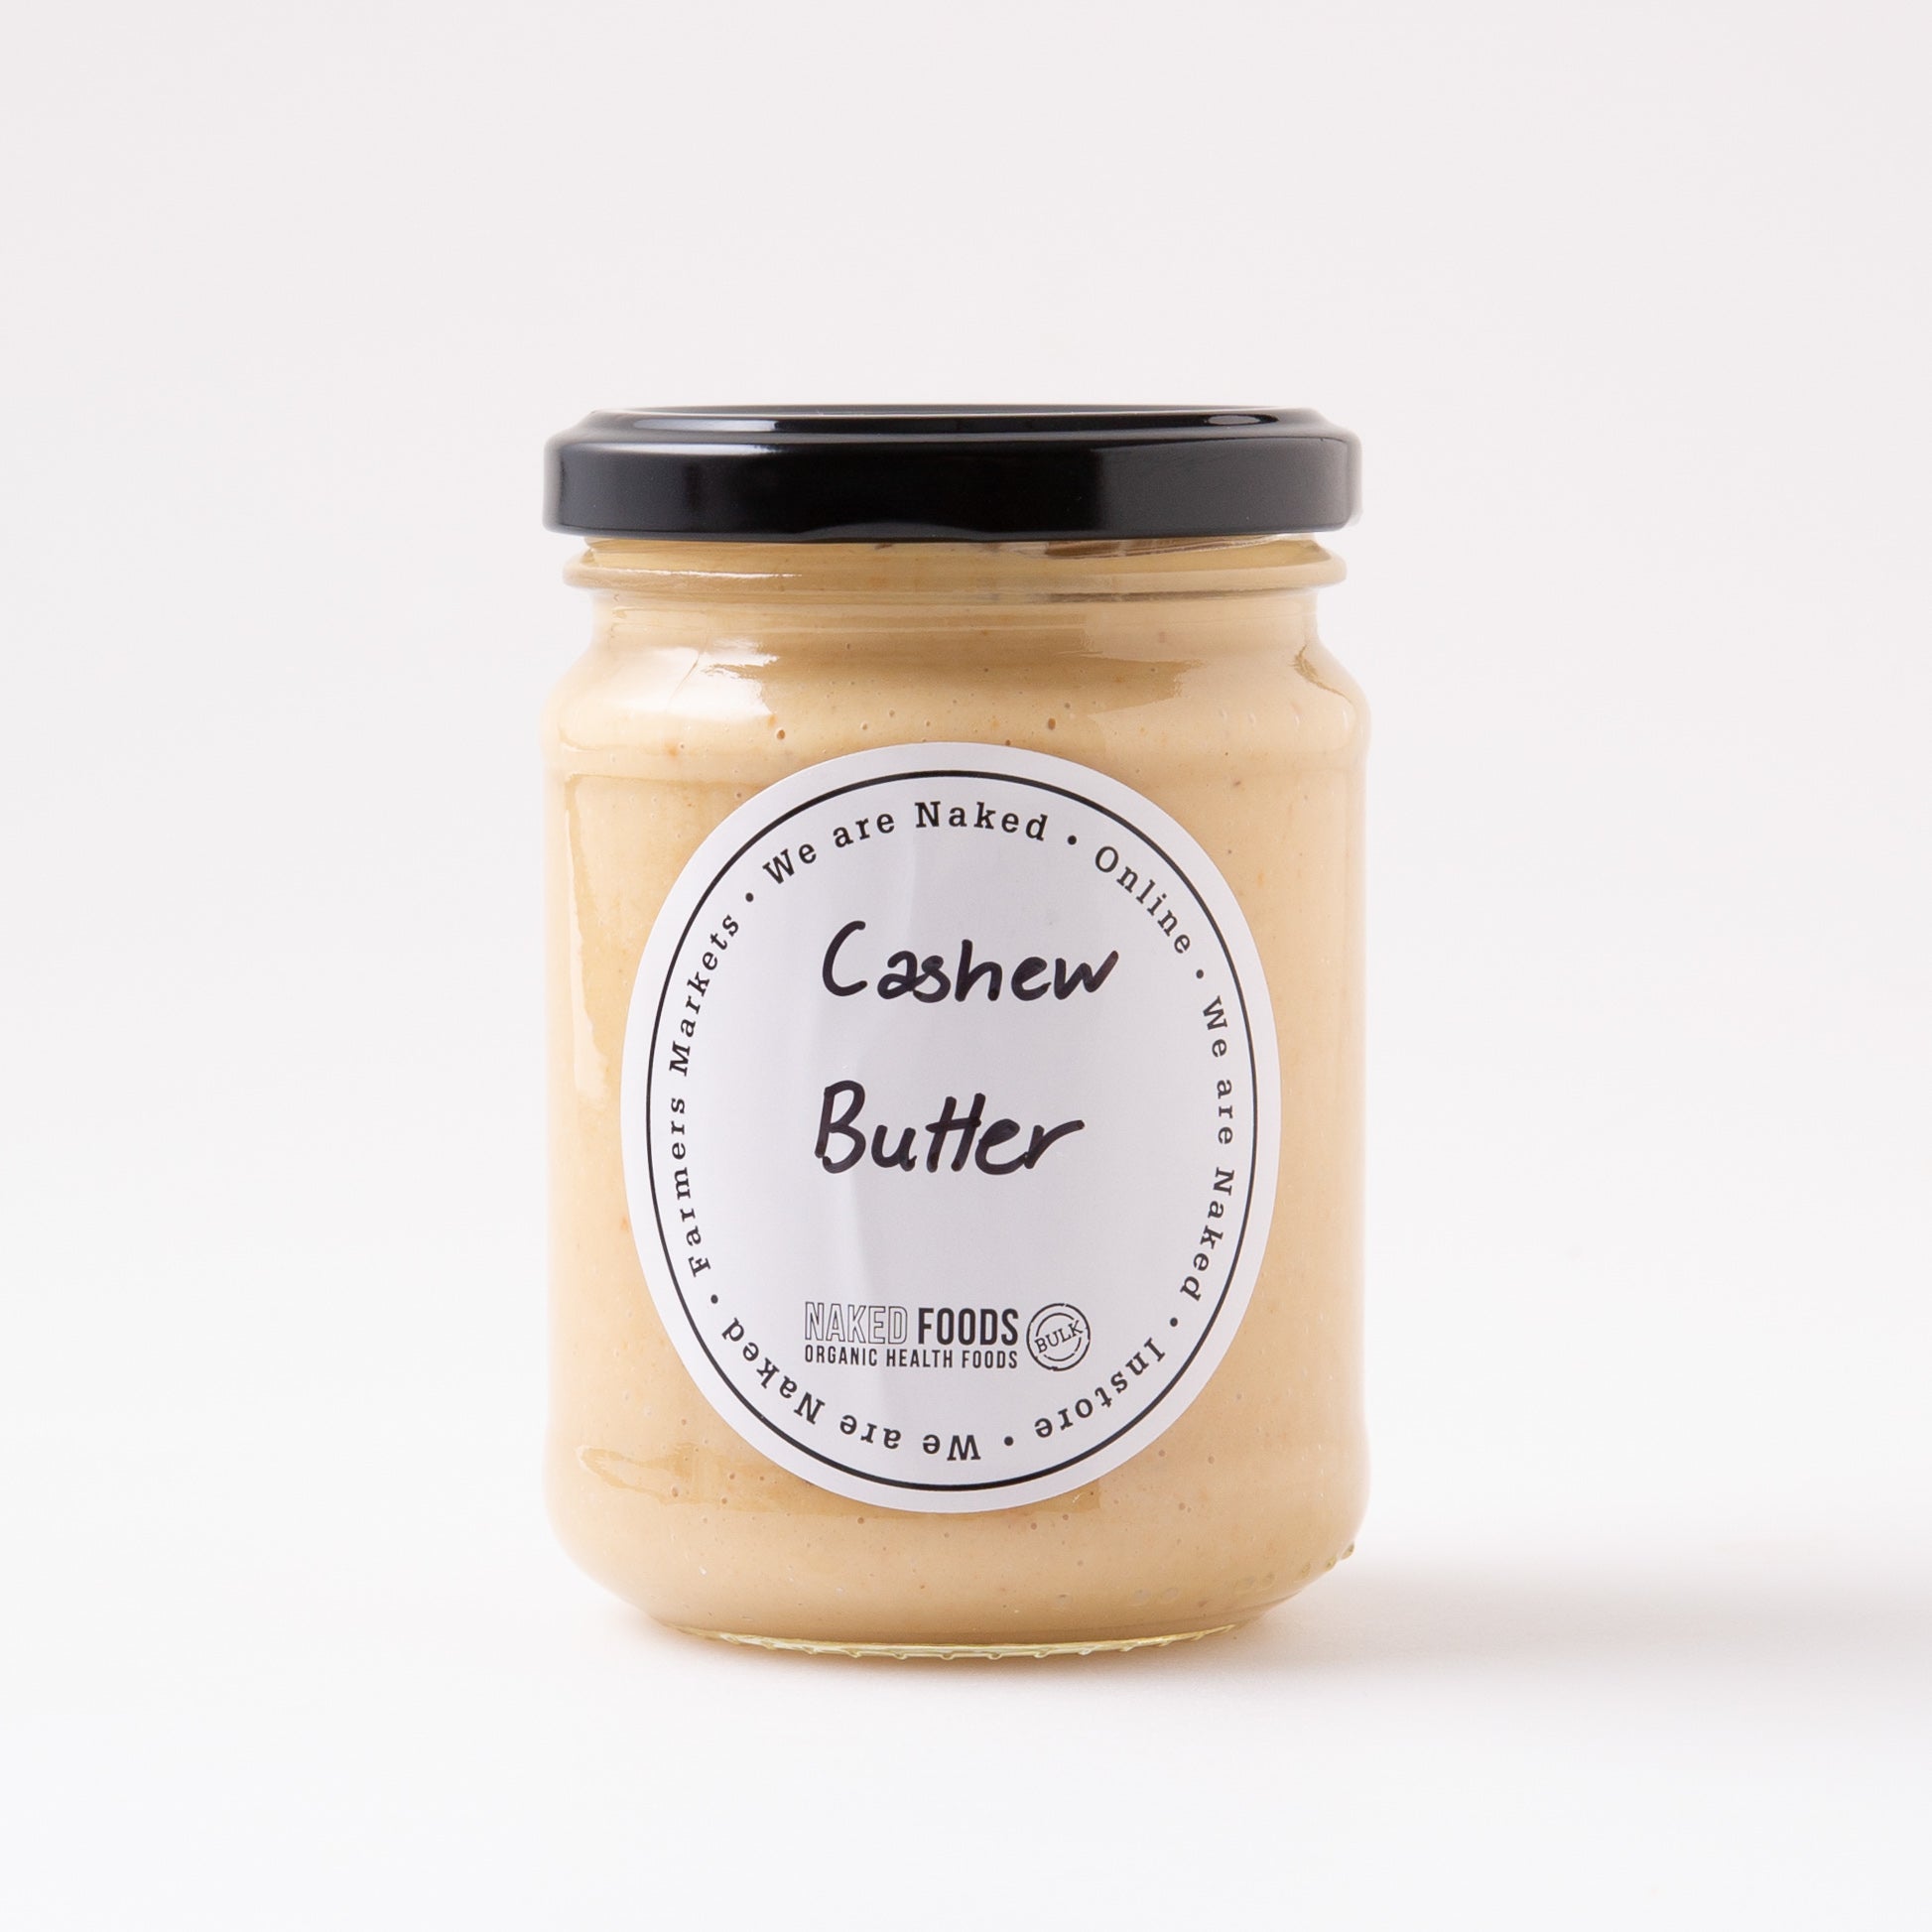 Cashew Nut Butter (Spreads) Image 1 - Naked Foods